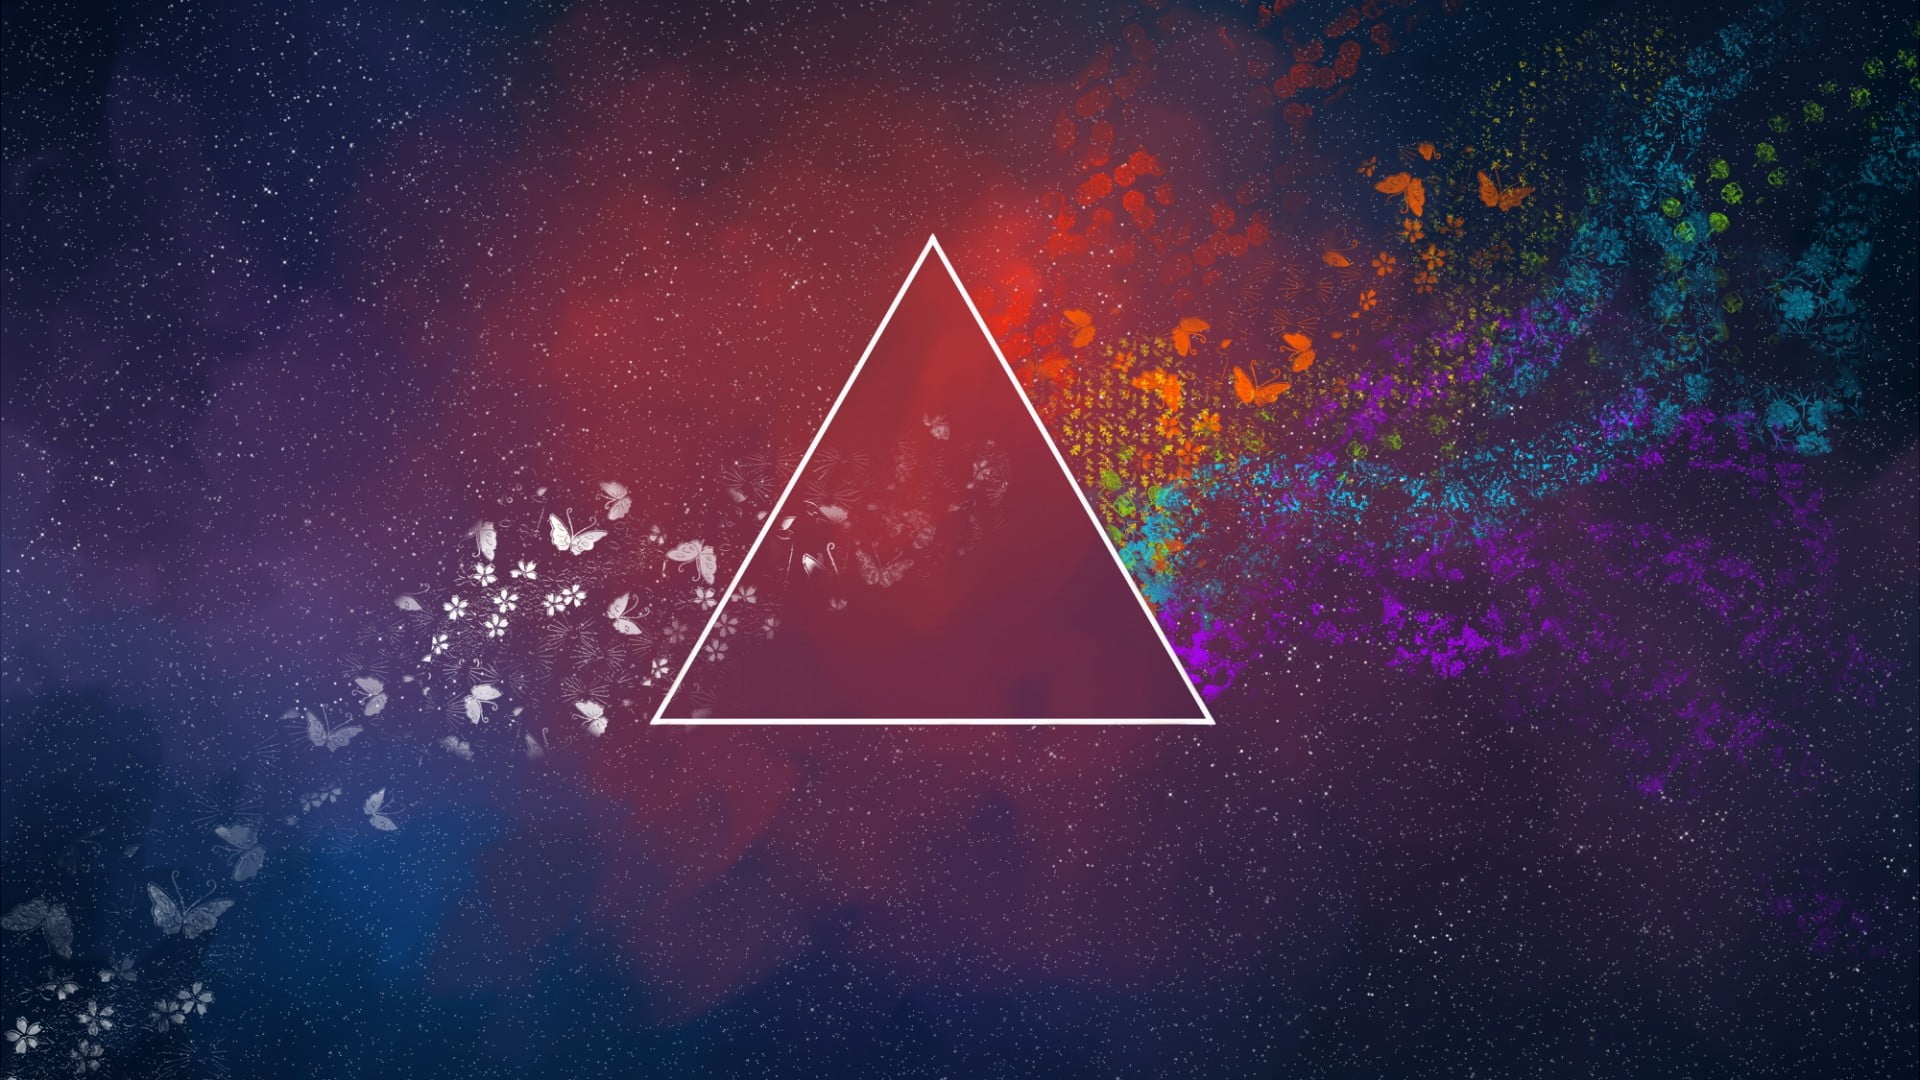 multicolored illustration with triangle, abstract, flowers, Pink Floyd